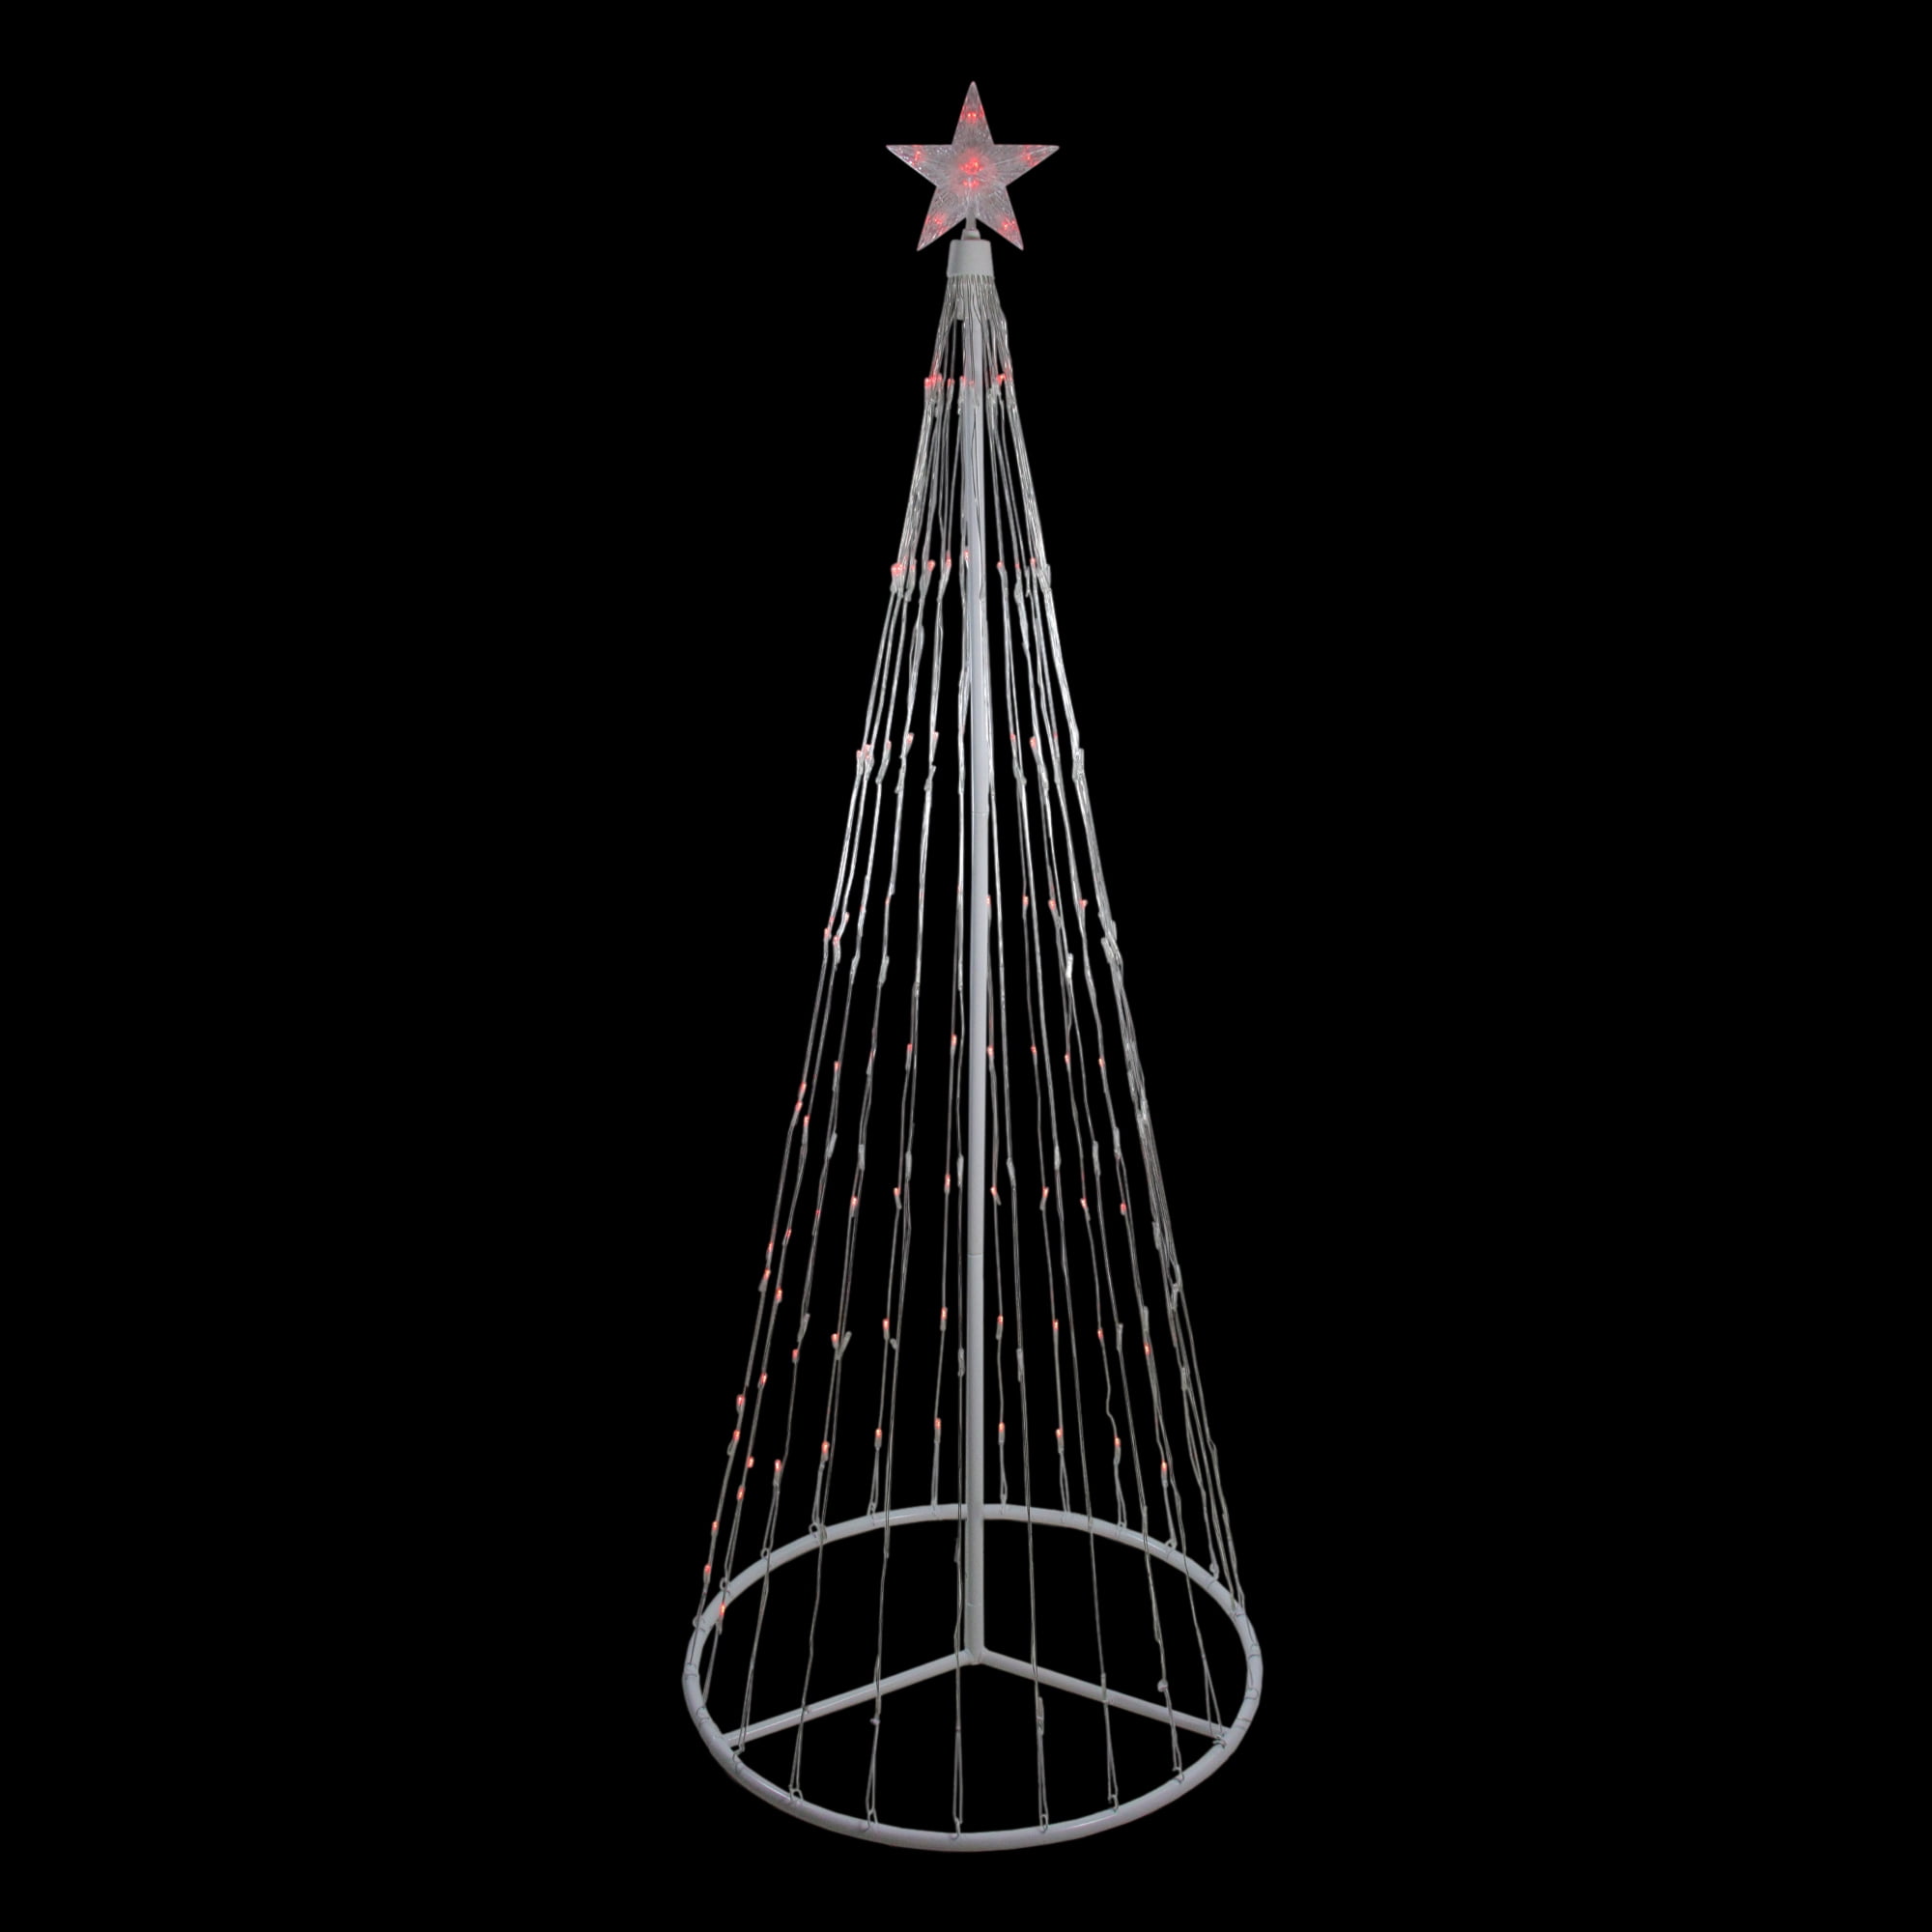 6' Red LED Lighted Show Cone Christmas Tree Outdoor Decoration ...